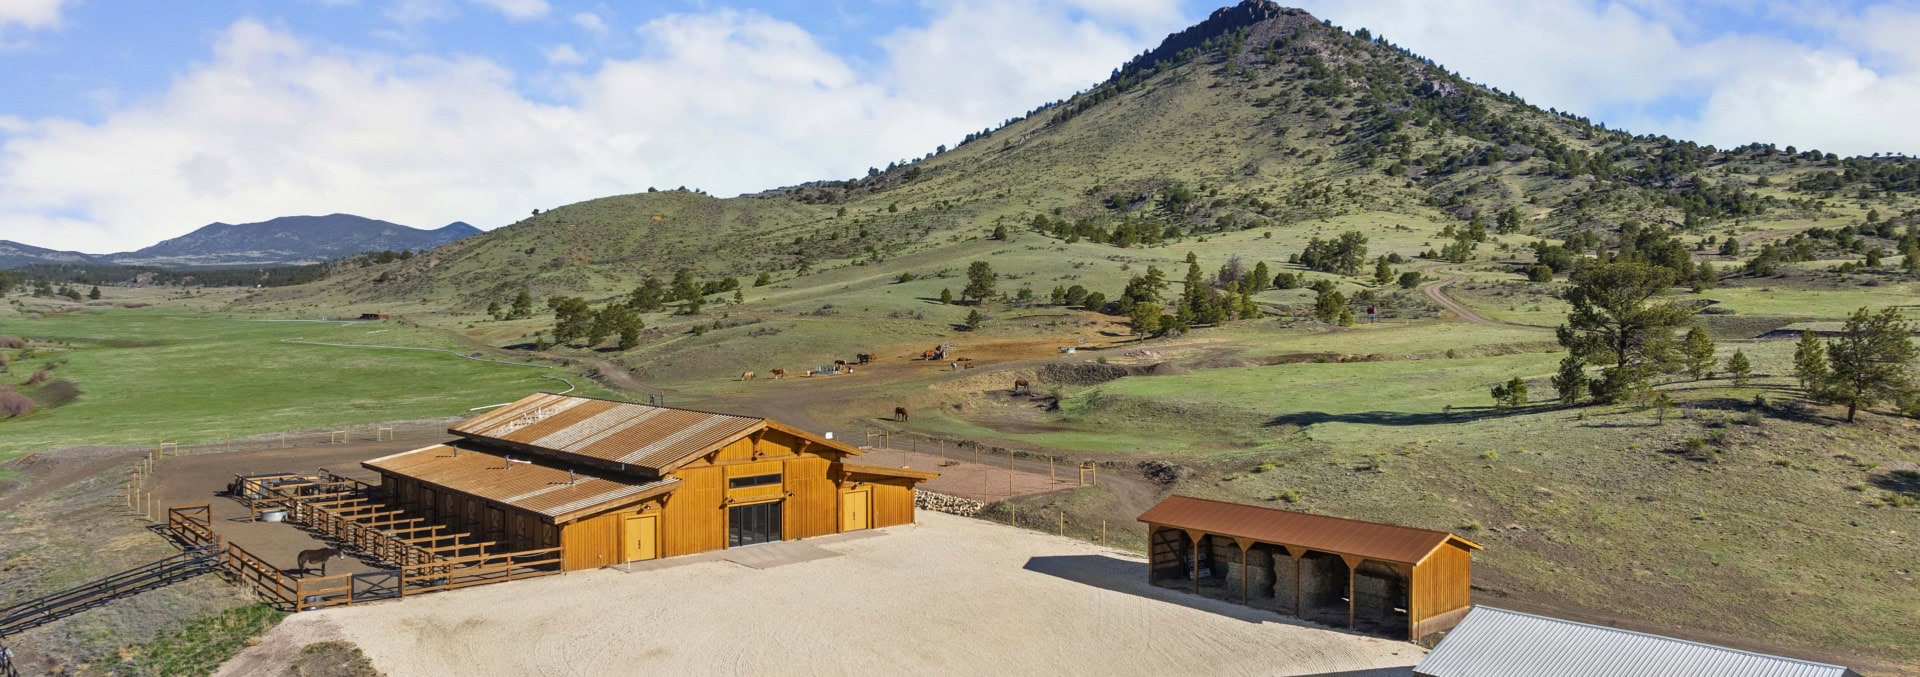 colorado equestrian properties for sale gold pan guest ranch